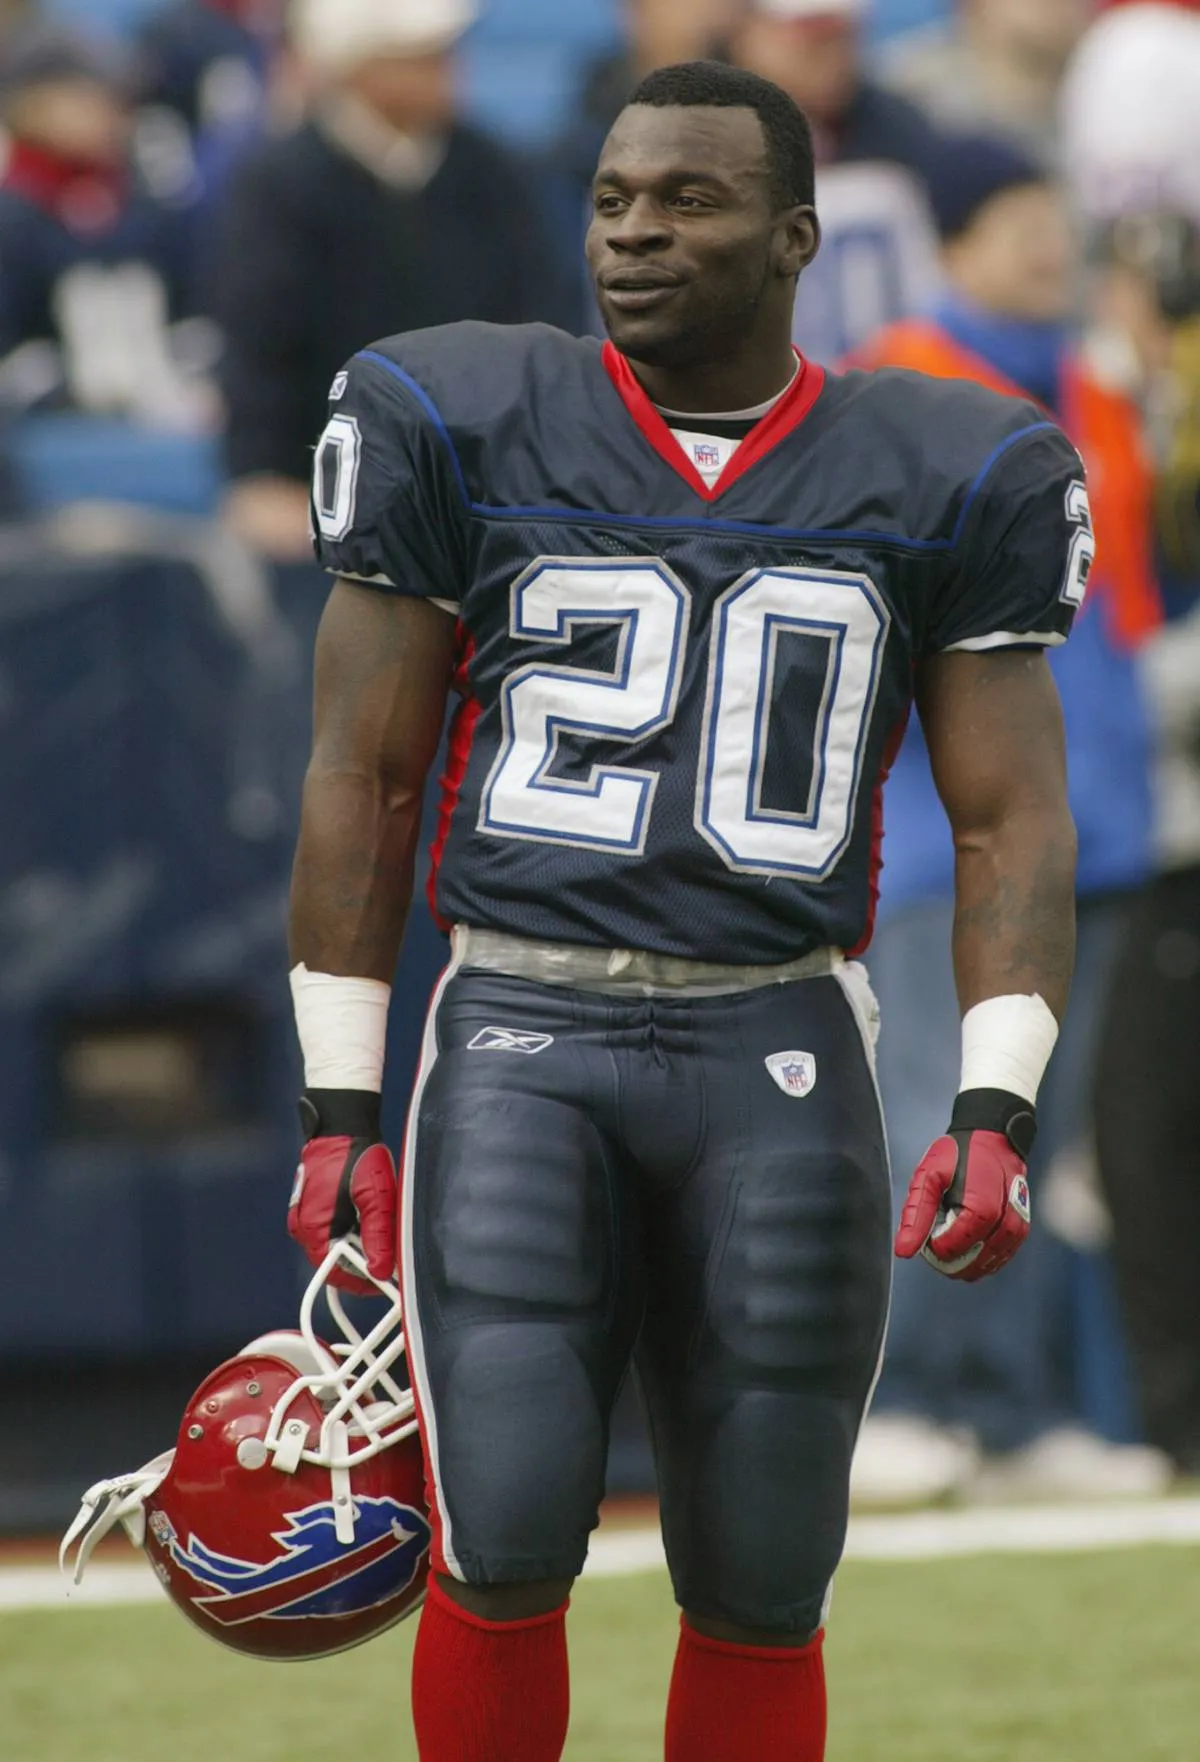 Running back Travis Henry #20 of the Buffalo Bills looks on while facing the New York Jets during the game on November 7, 2004 at Ralph Wilson Stadium in Orchard Park, New York